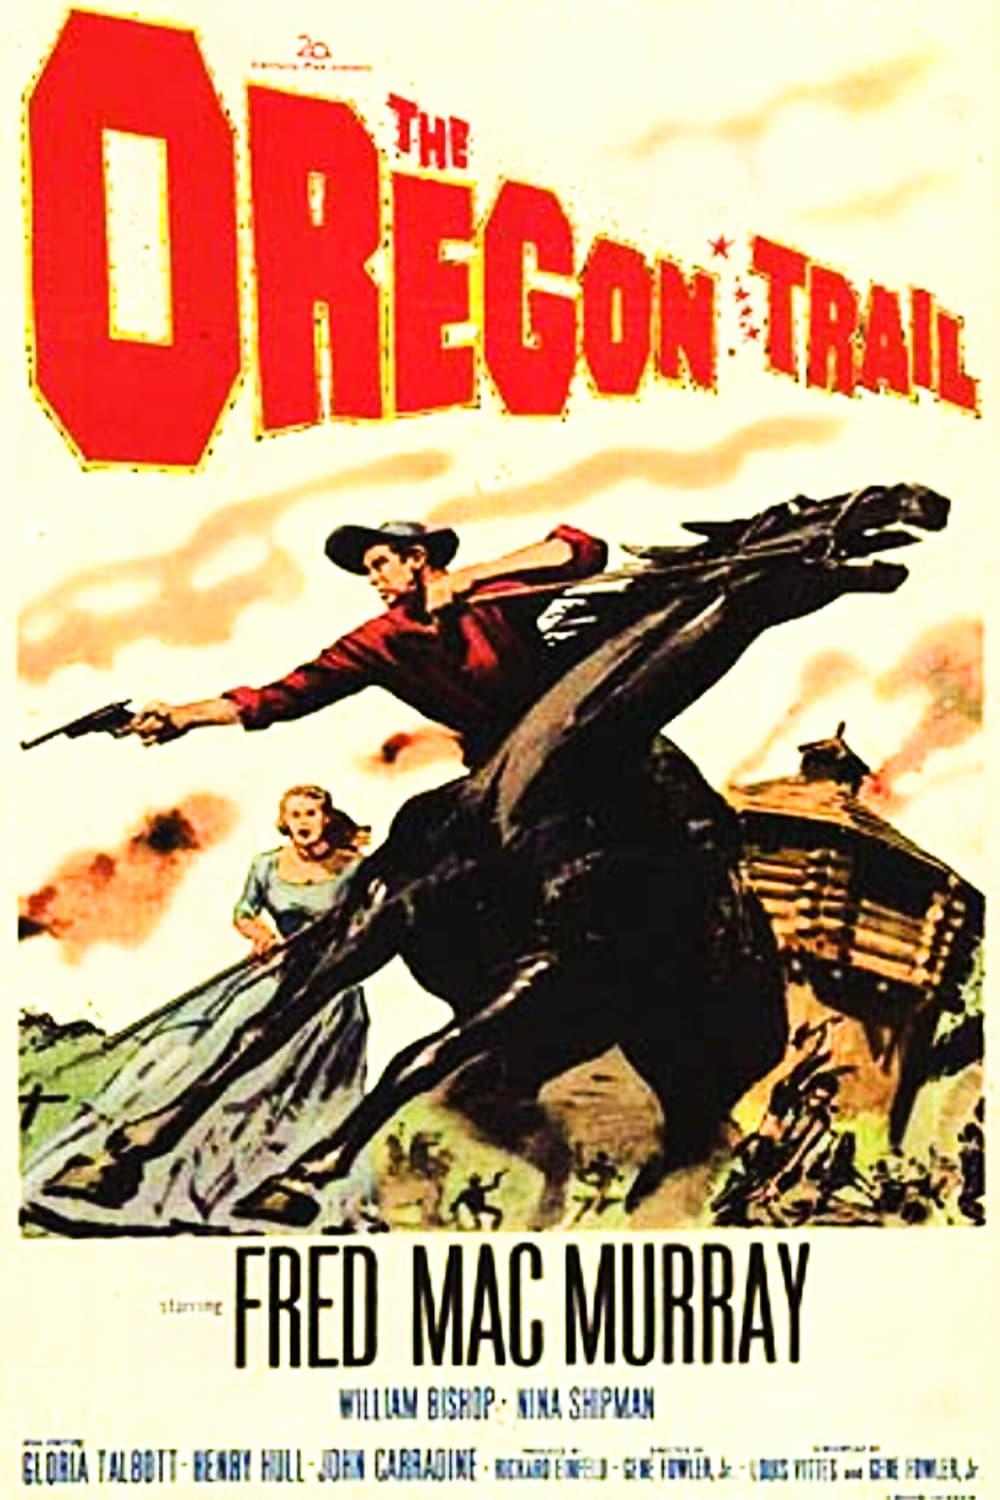 The Oregon Trail poster